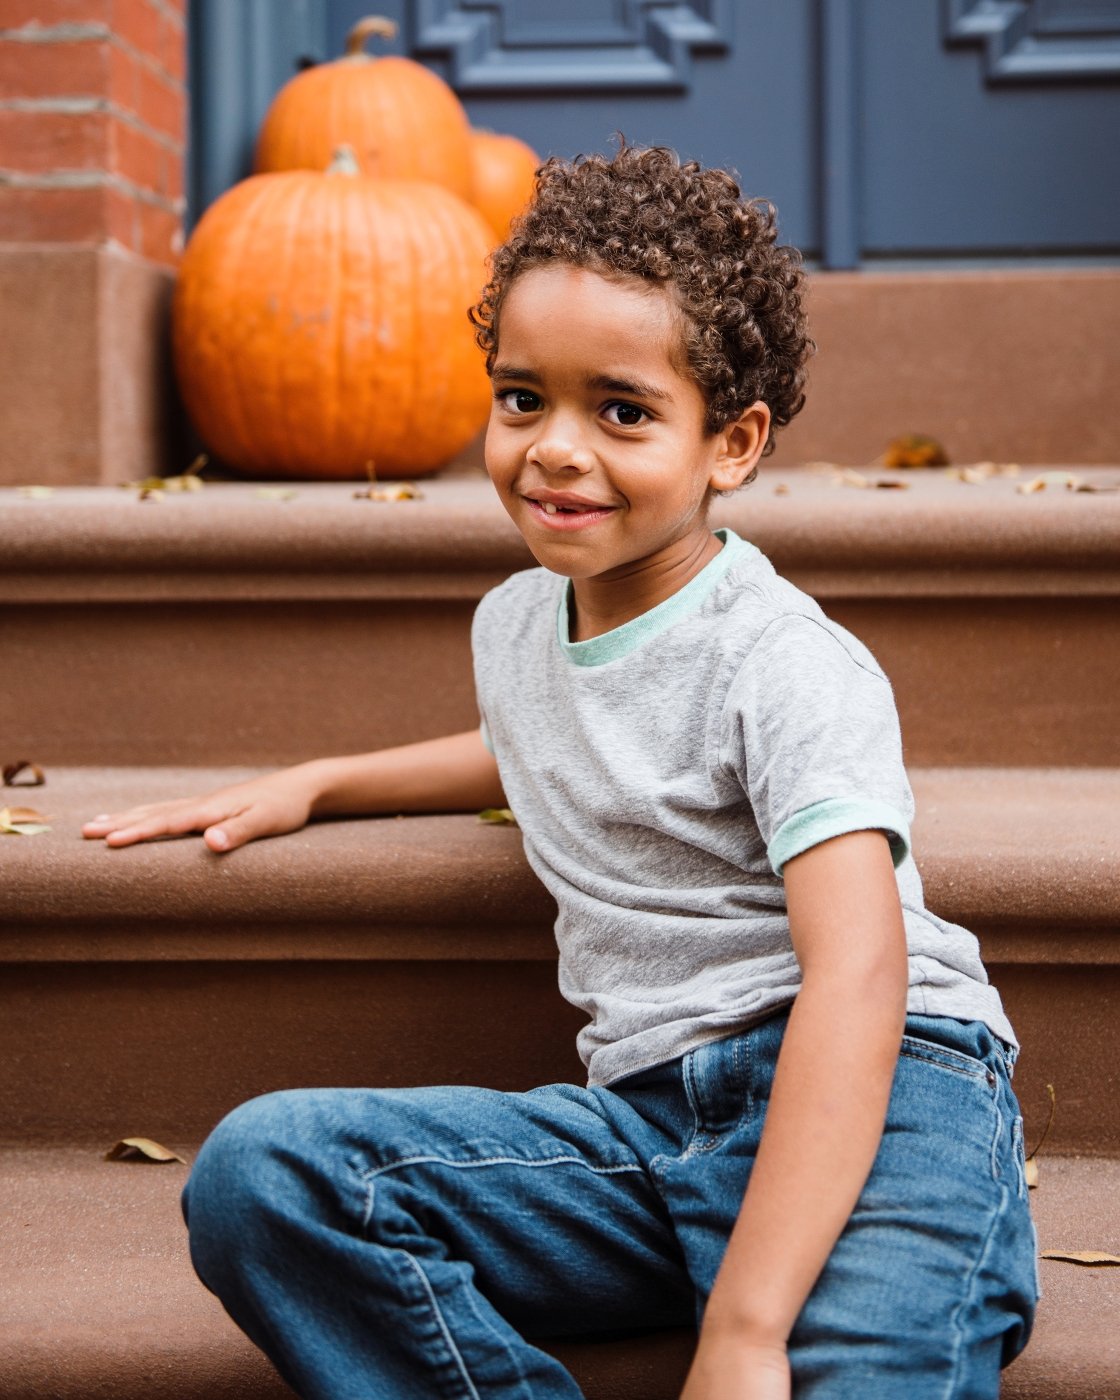 West Village NYC Family Photography